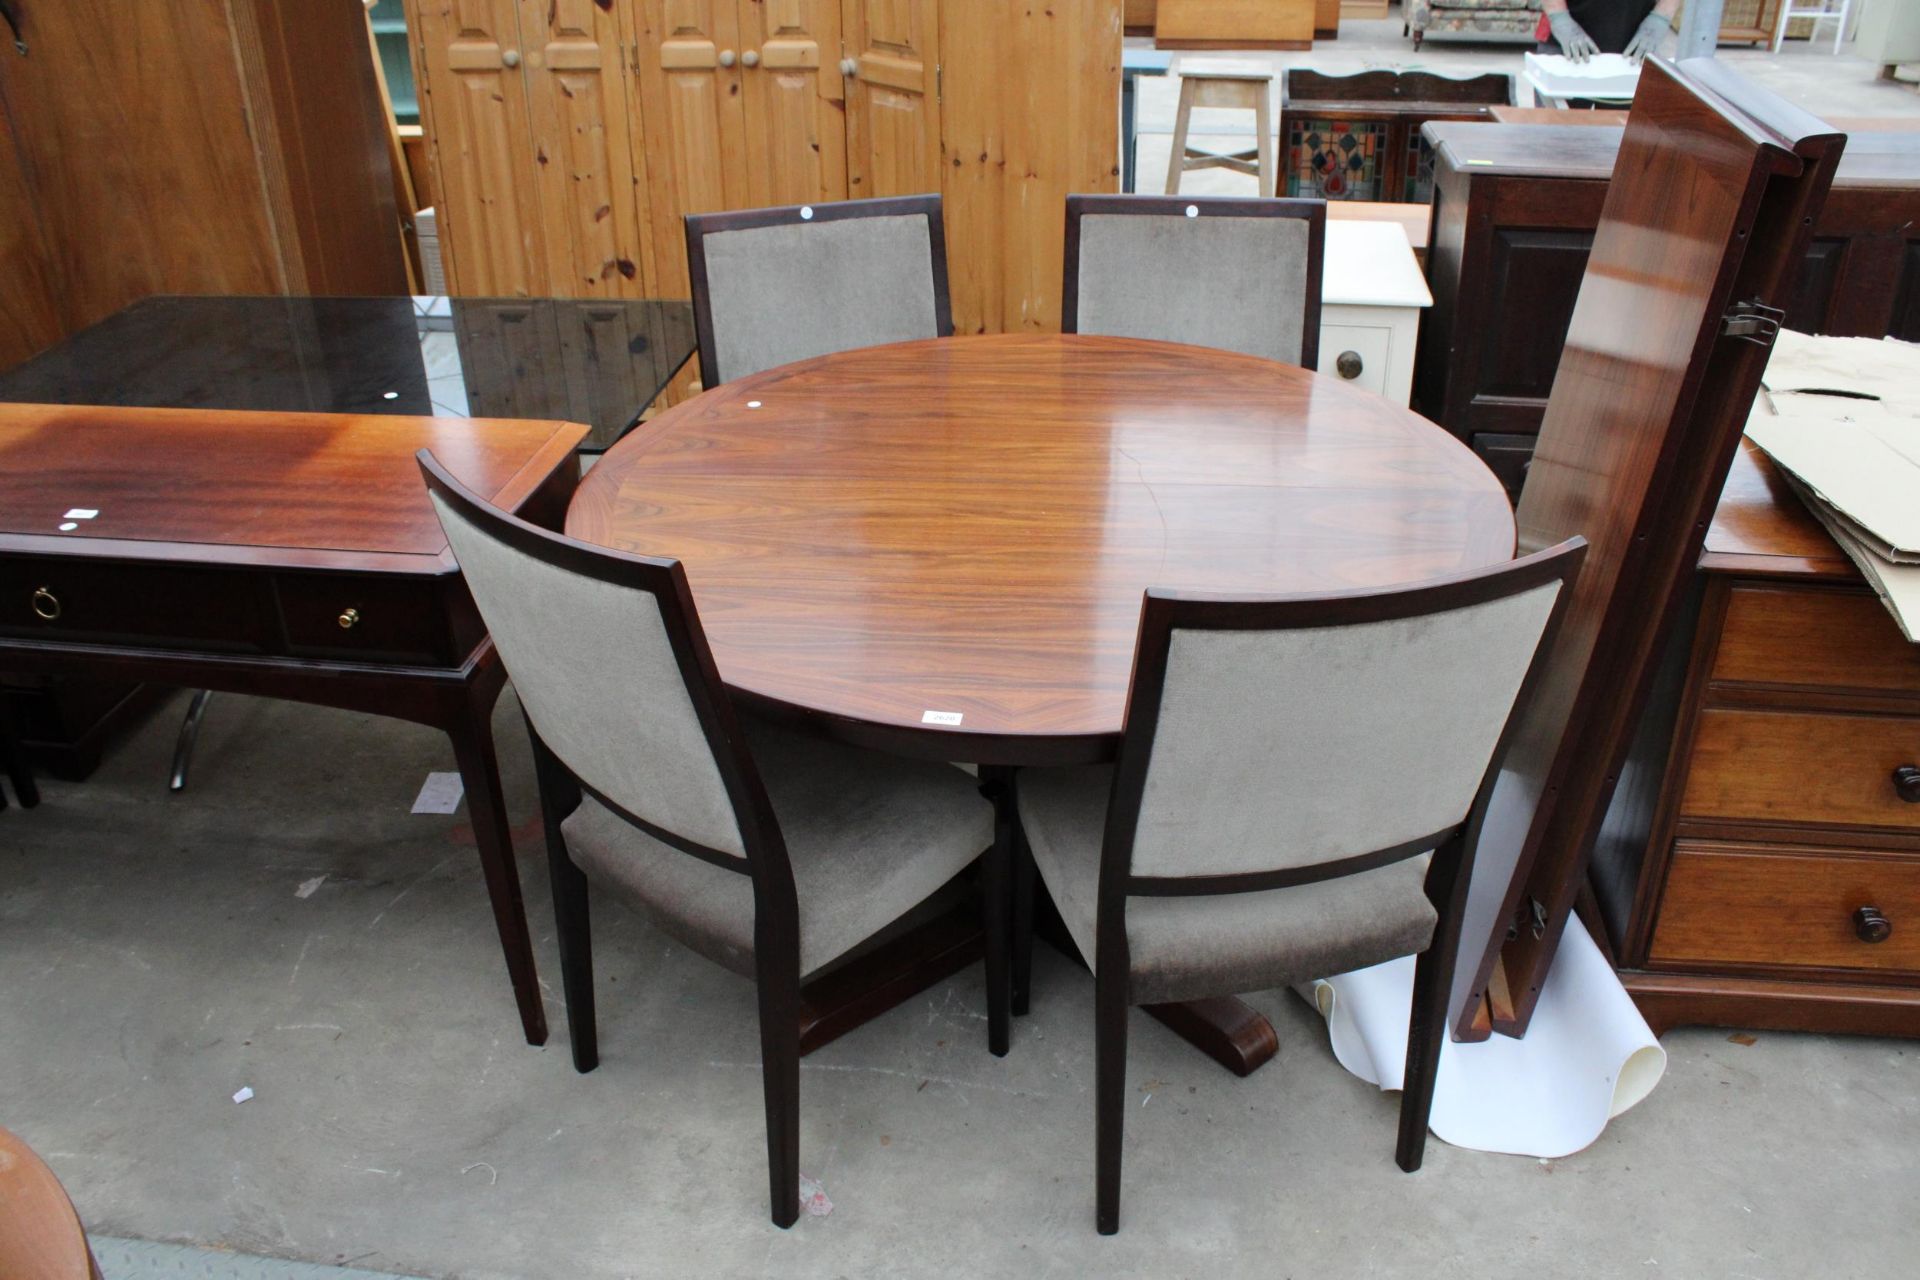 A RETRO HARDWOOD 49" DIAMETER EXTENDING DINING TABLE WITH TWO LEAVES (20" EACH) AND FOUR DINING